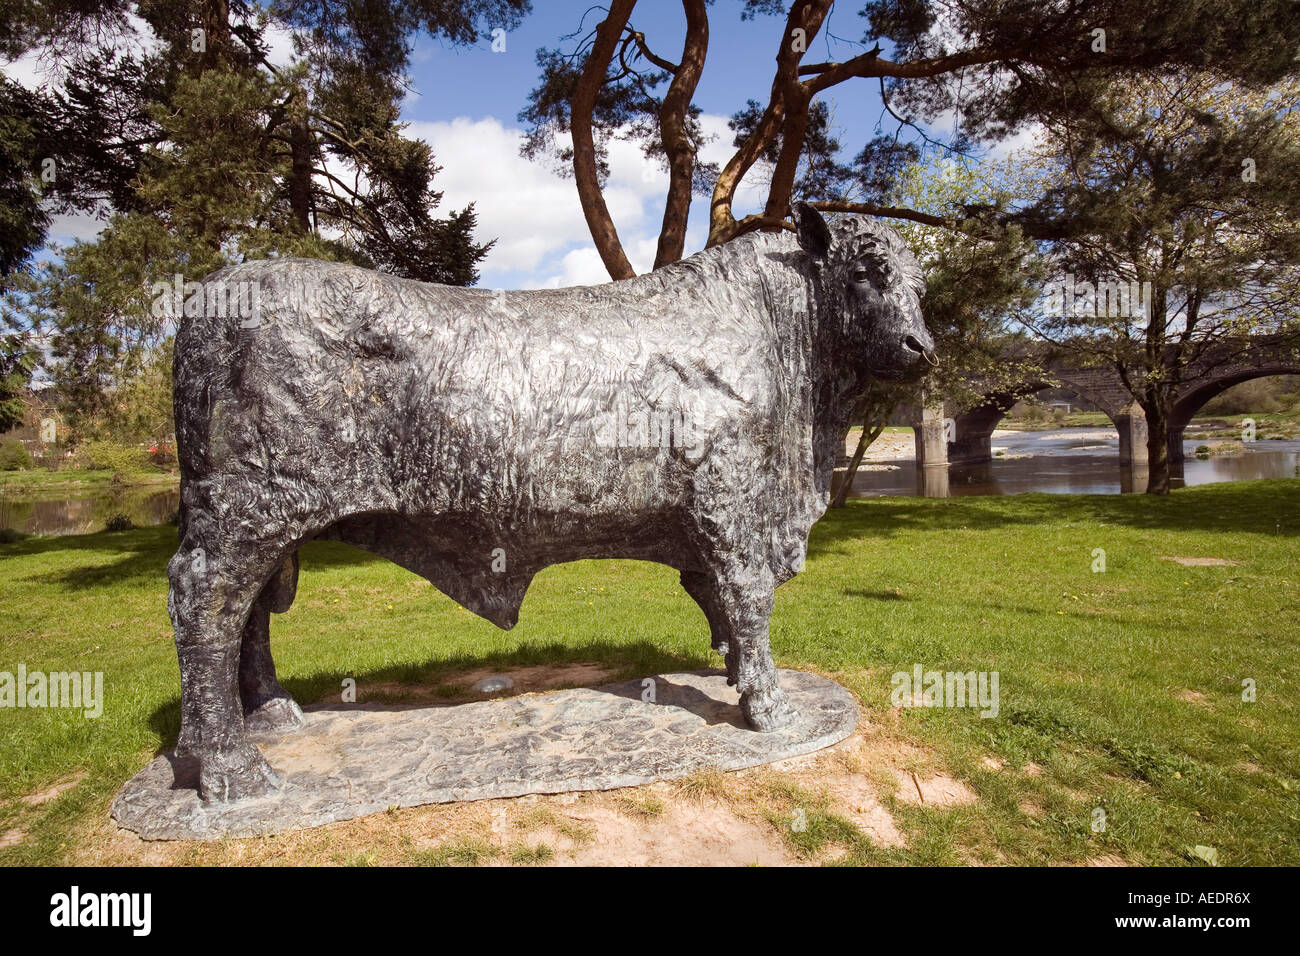 UK Wales Powys Builth Wells Bull sculpture by Gavin Fifield Stock Photo